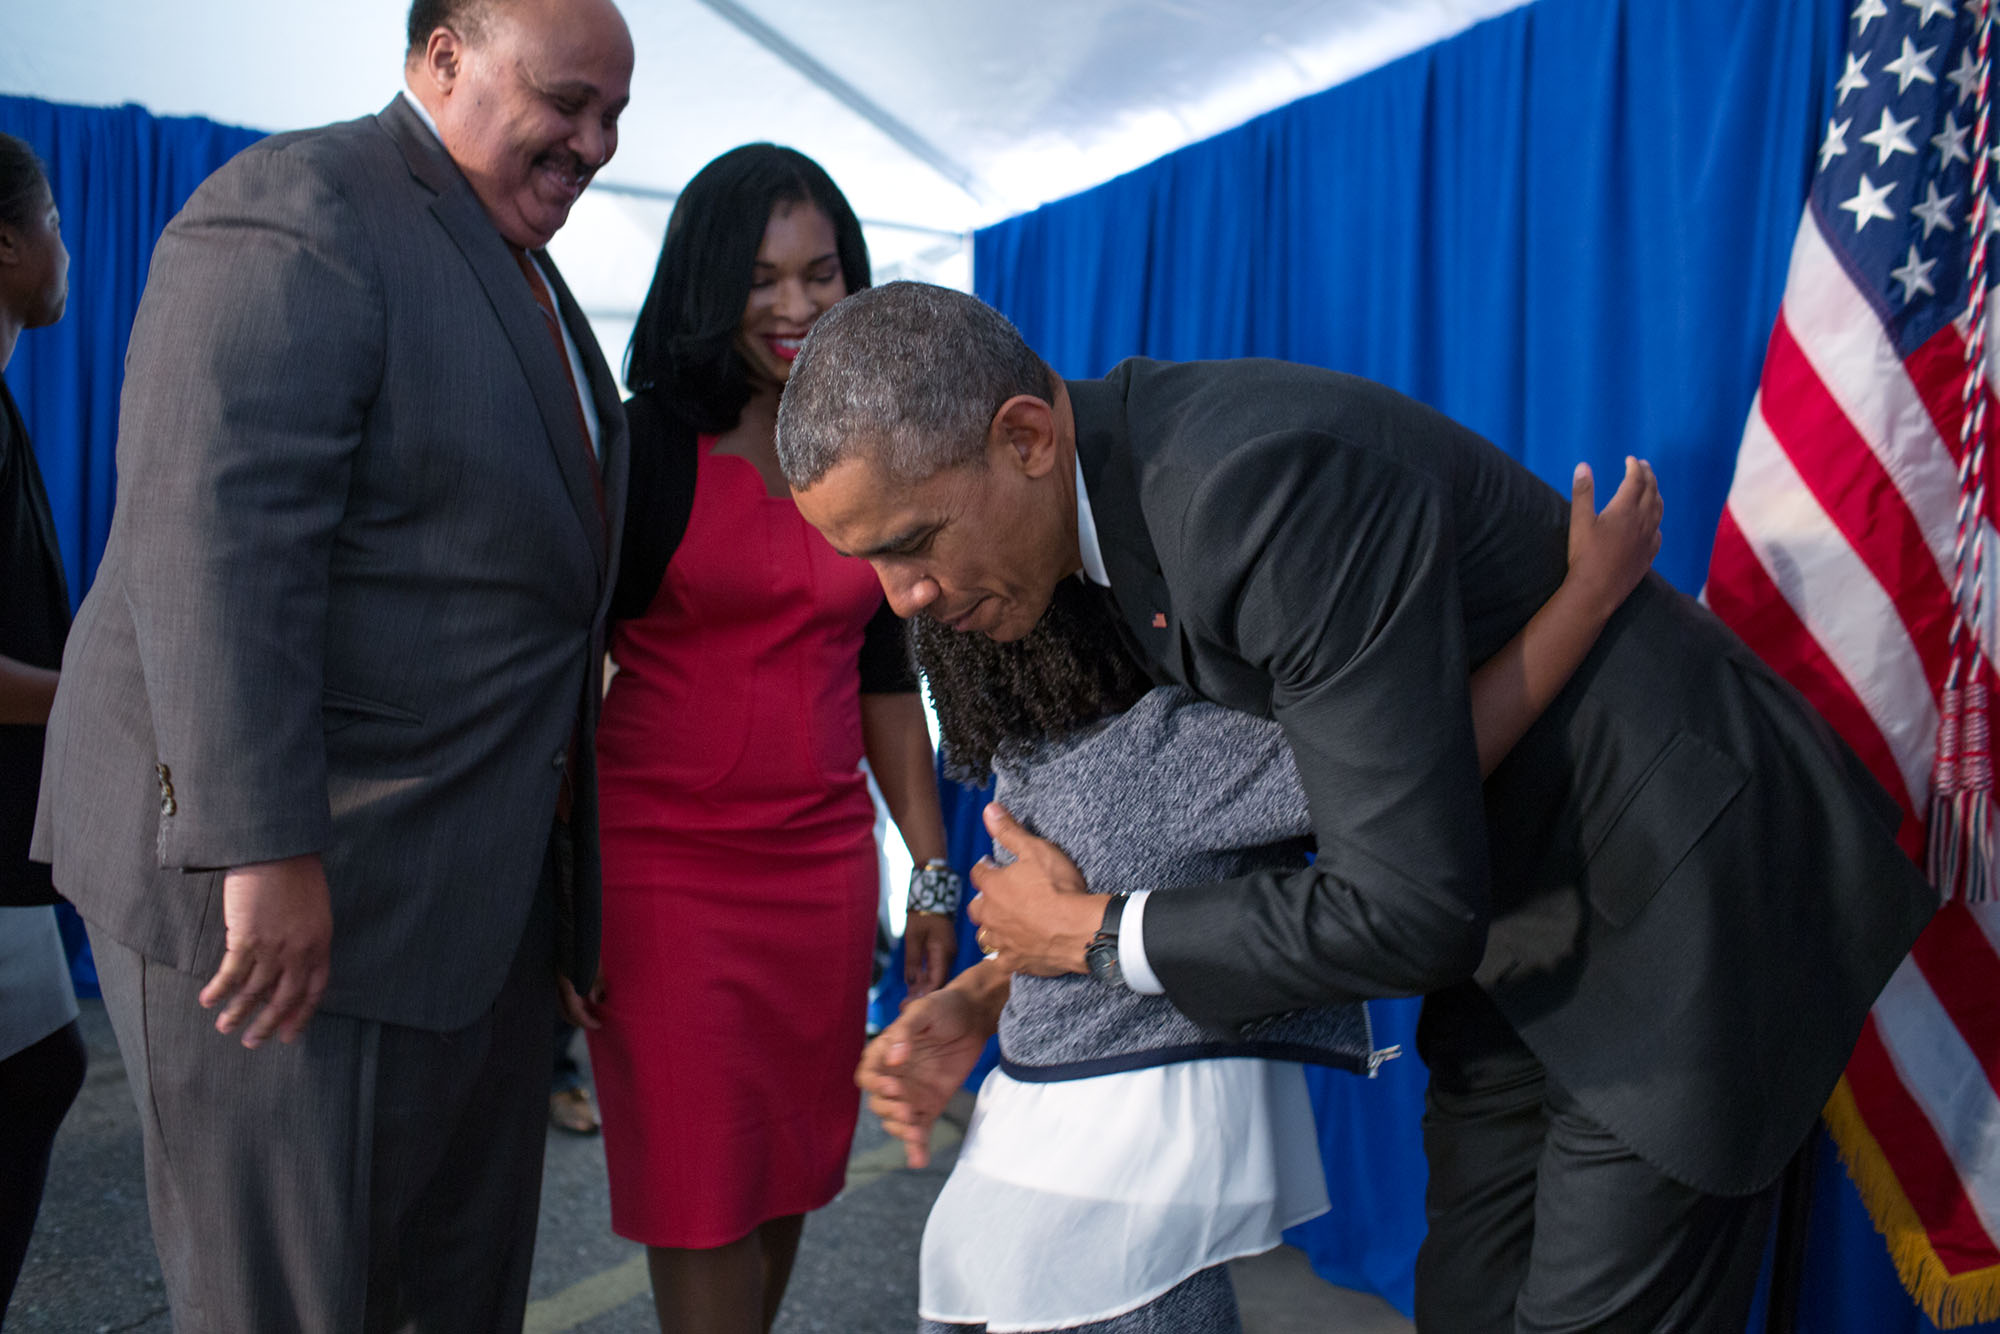 The President hugs Yolanda Renee King, granddaughter of Martin Luther King, Jr., as her parents, Martin Luther King III and Andrea Waters look on. (Official White House Photo by Pete Souza)